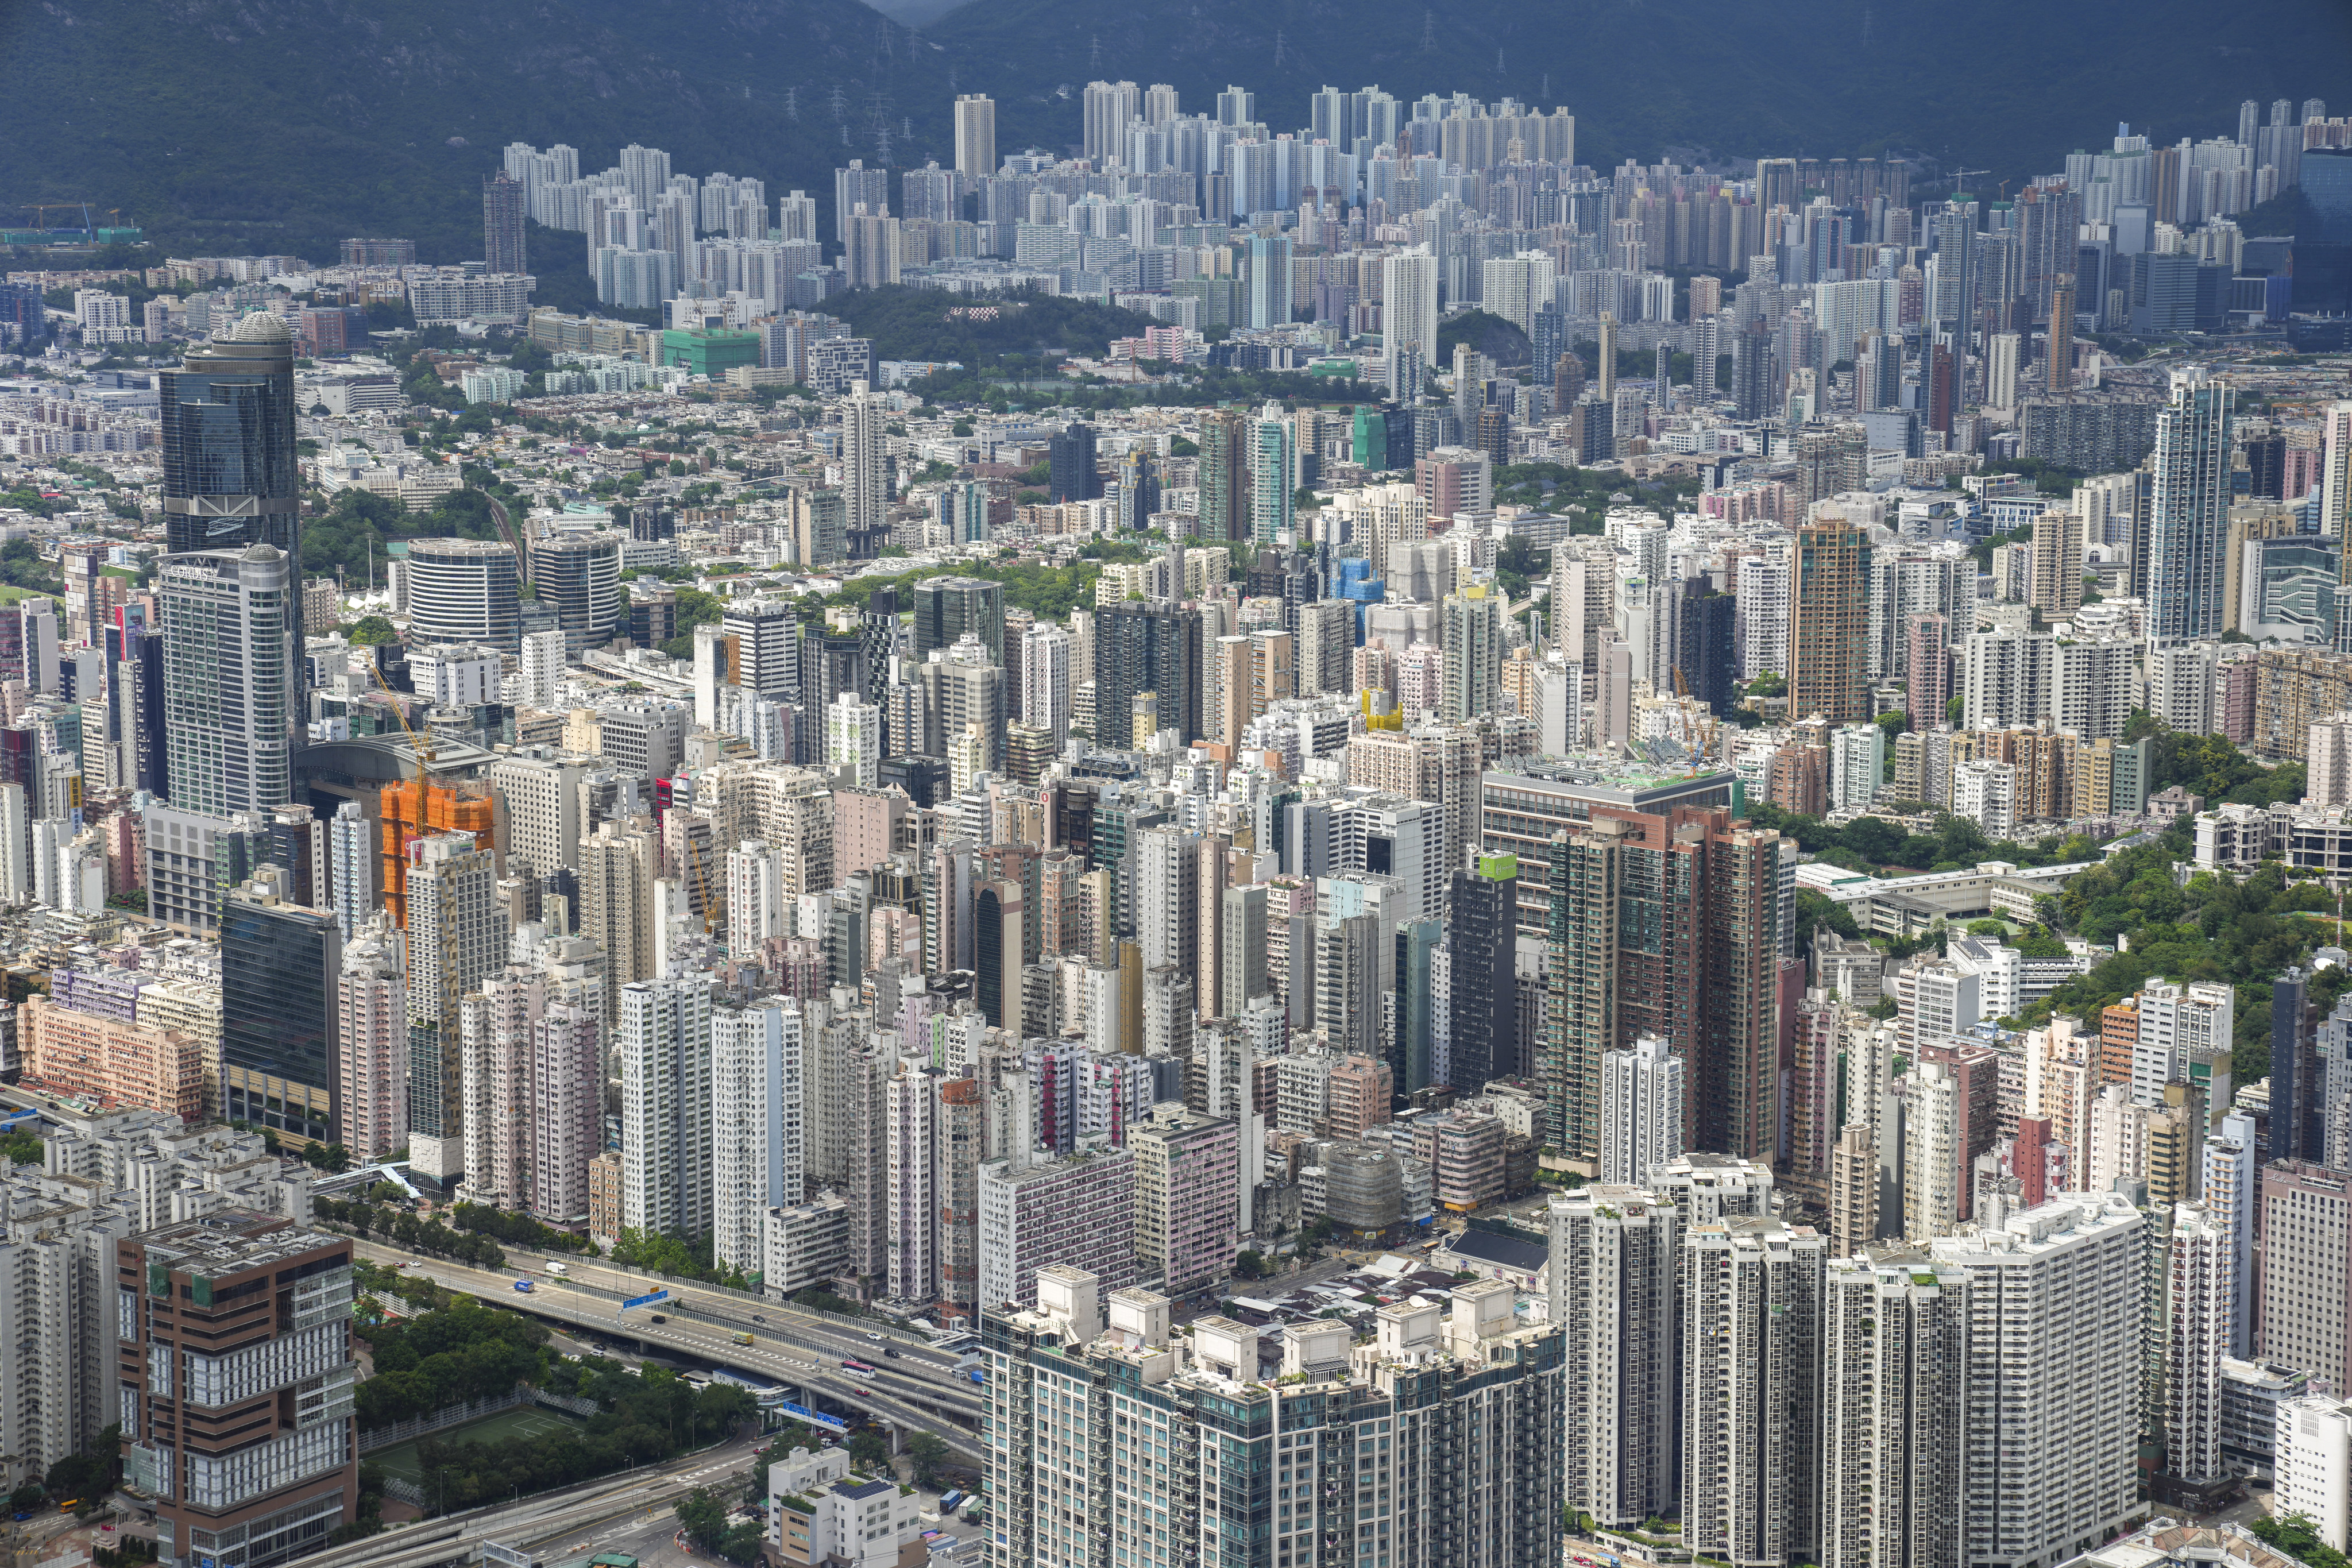 A view of Kowloon from sky100 observation deck on June 29. There is an increasing perception that Hong Kong is stuck in the past and unable to effectively tackle problems such as housing. Photo: Sam Tsang 